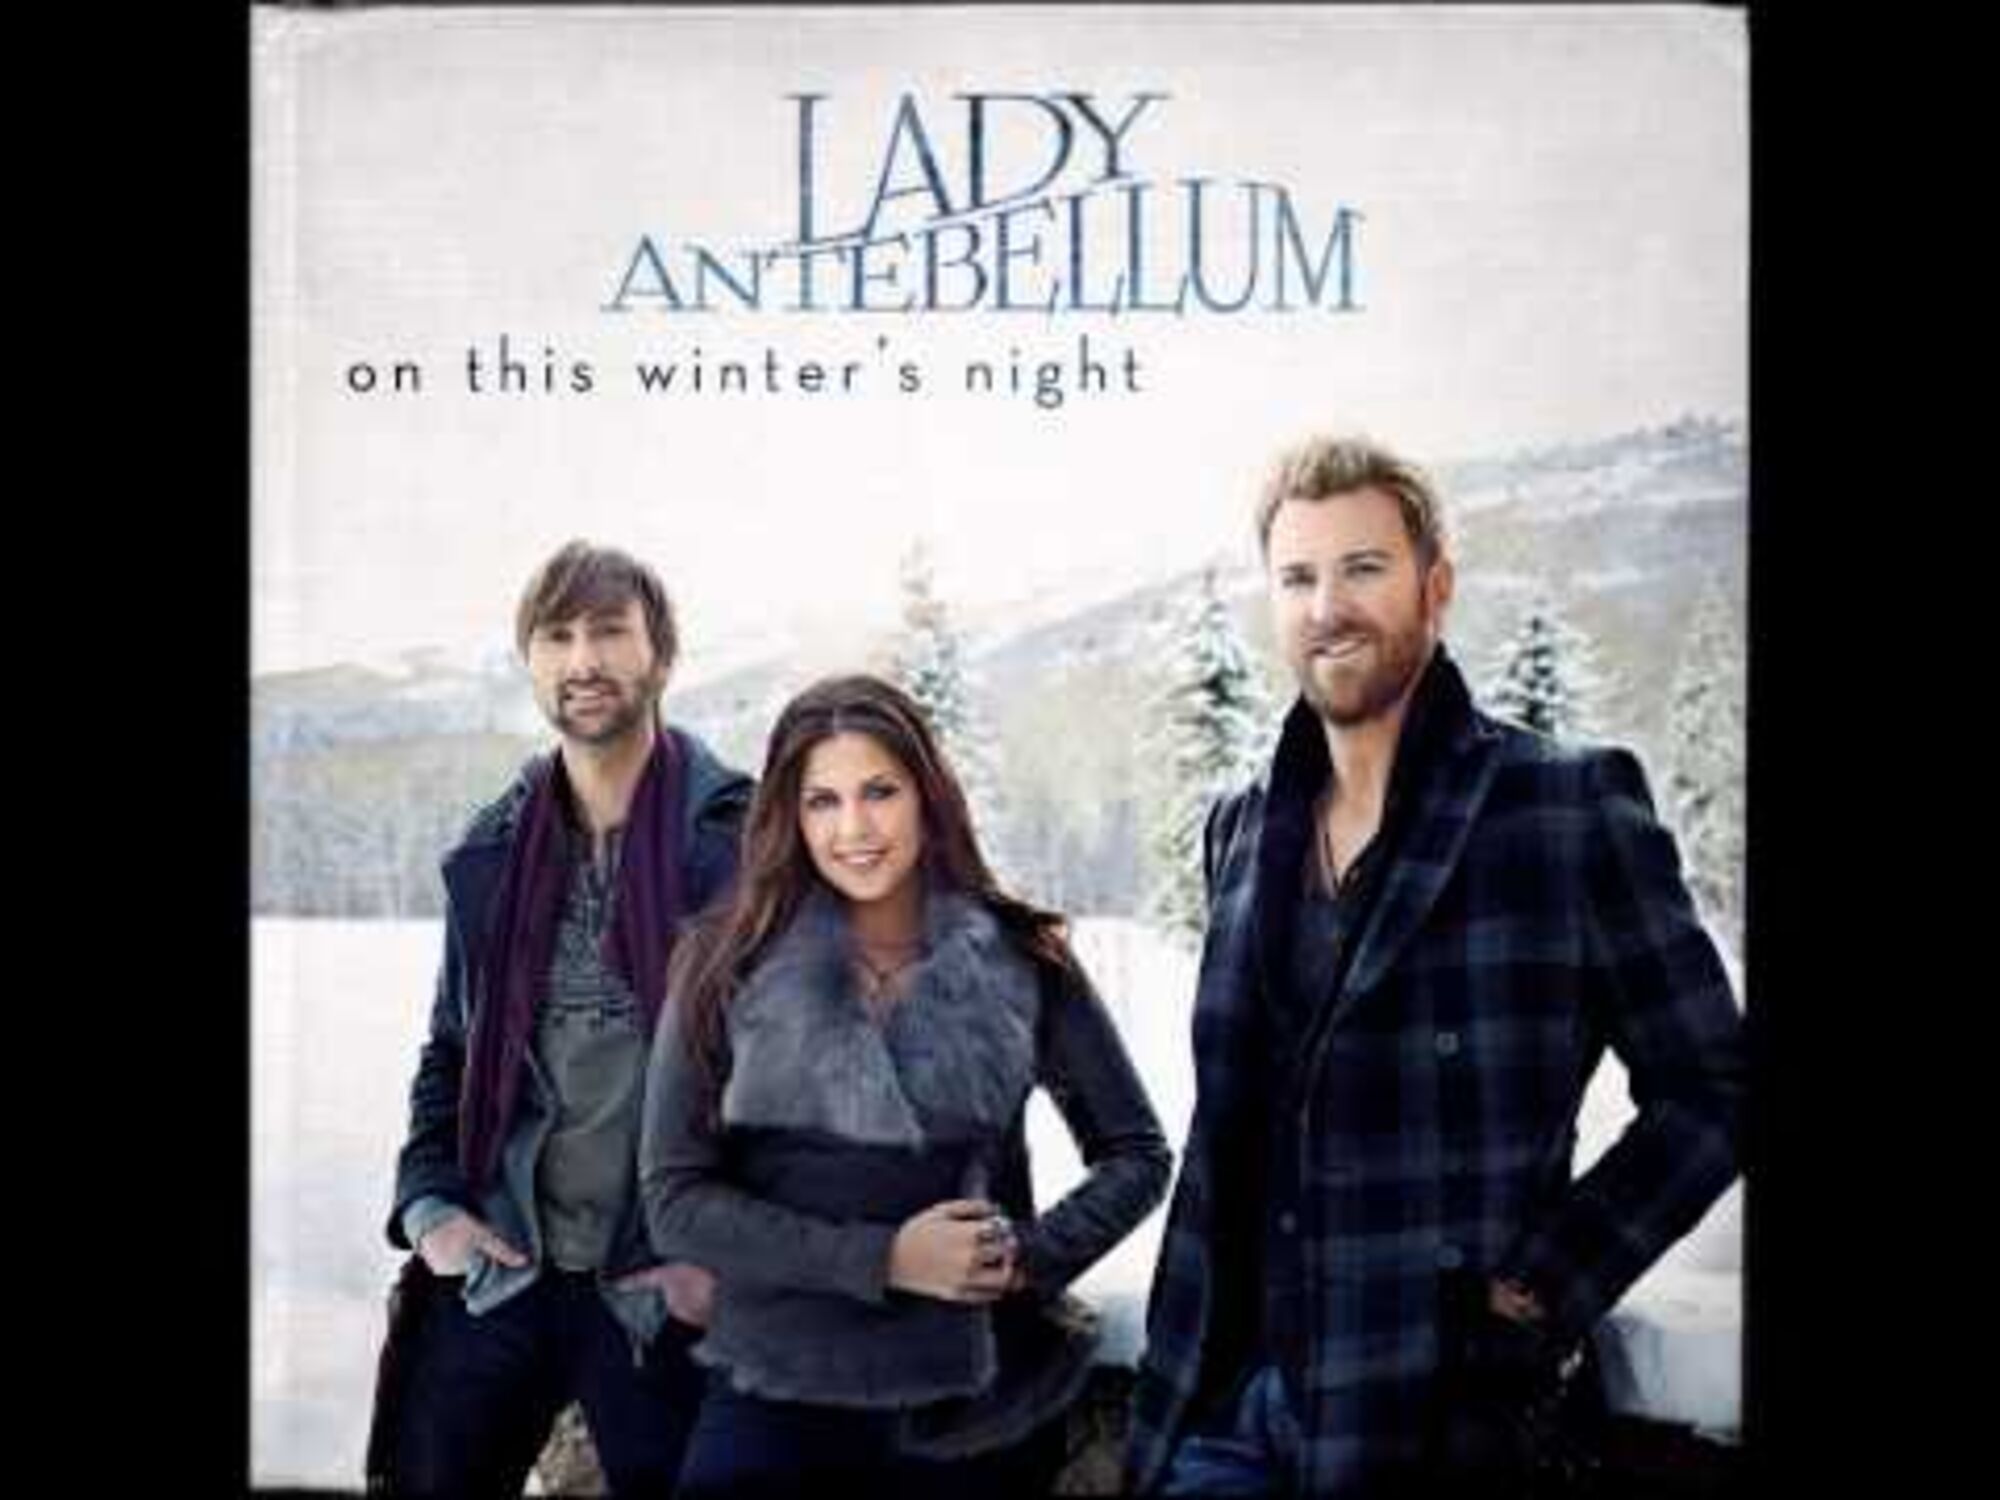 Christmas (Baby Please Come Home) by Lady Antebellum (Album Cover) (HD)